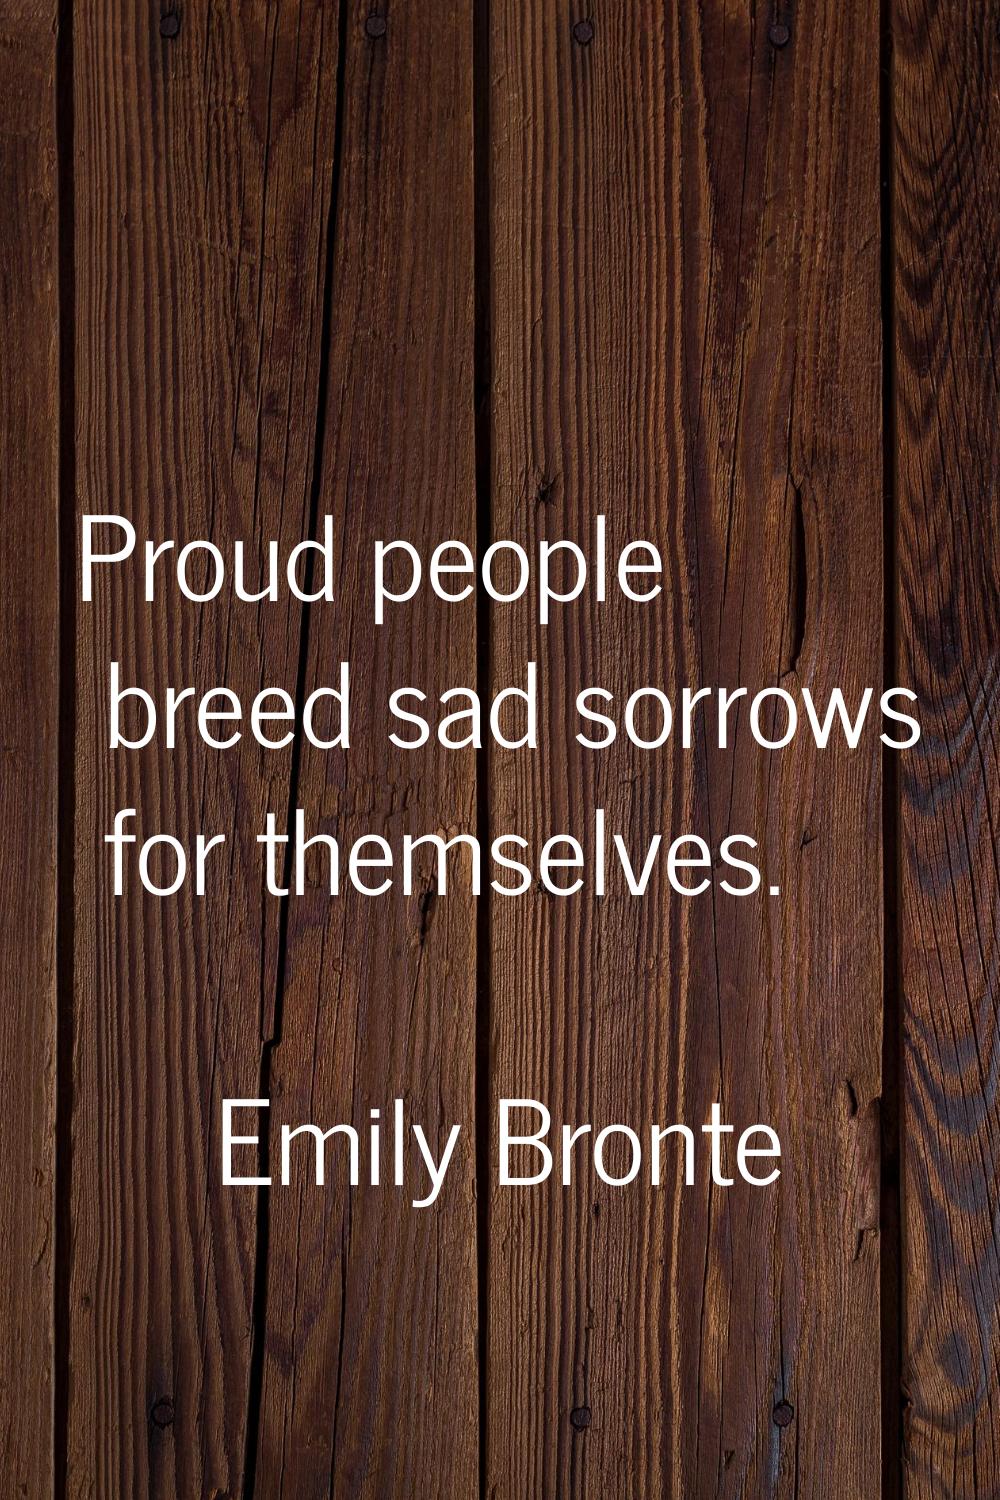 Proud people breed sad sorrows for themselves.